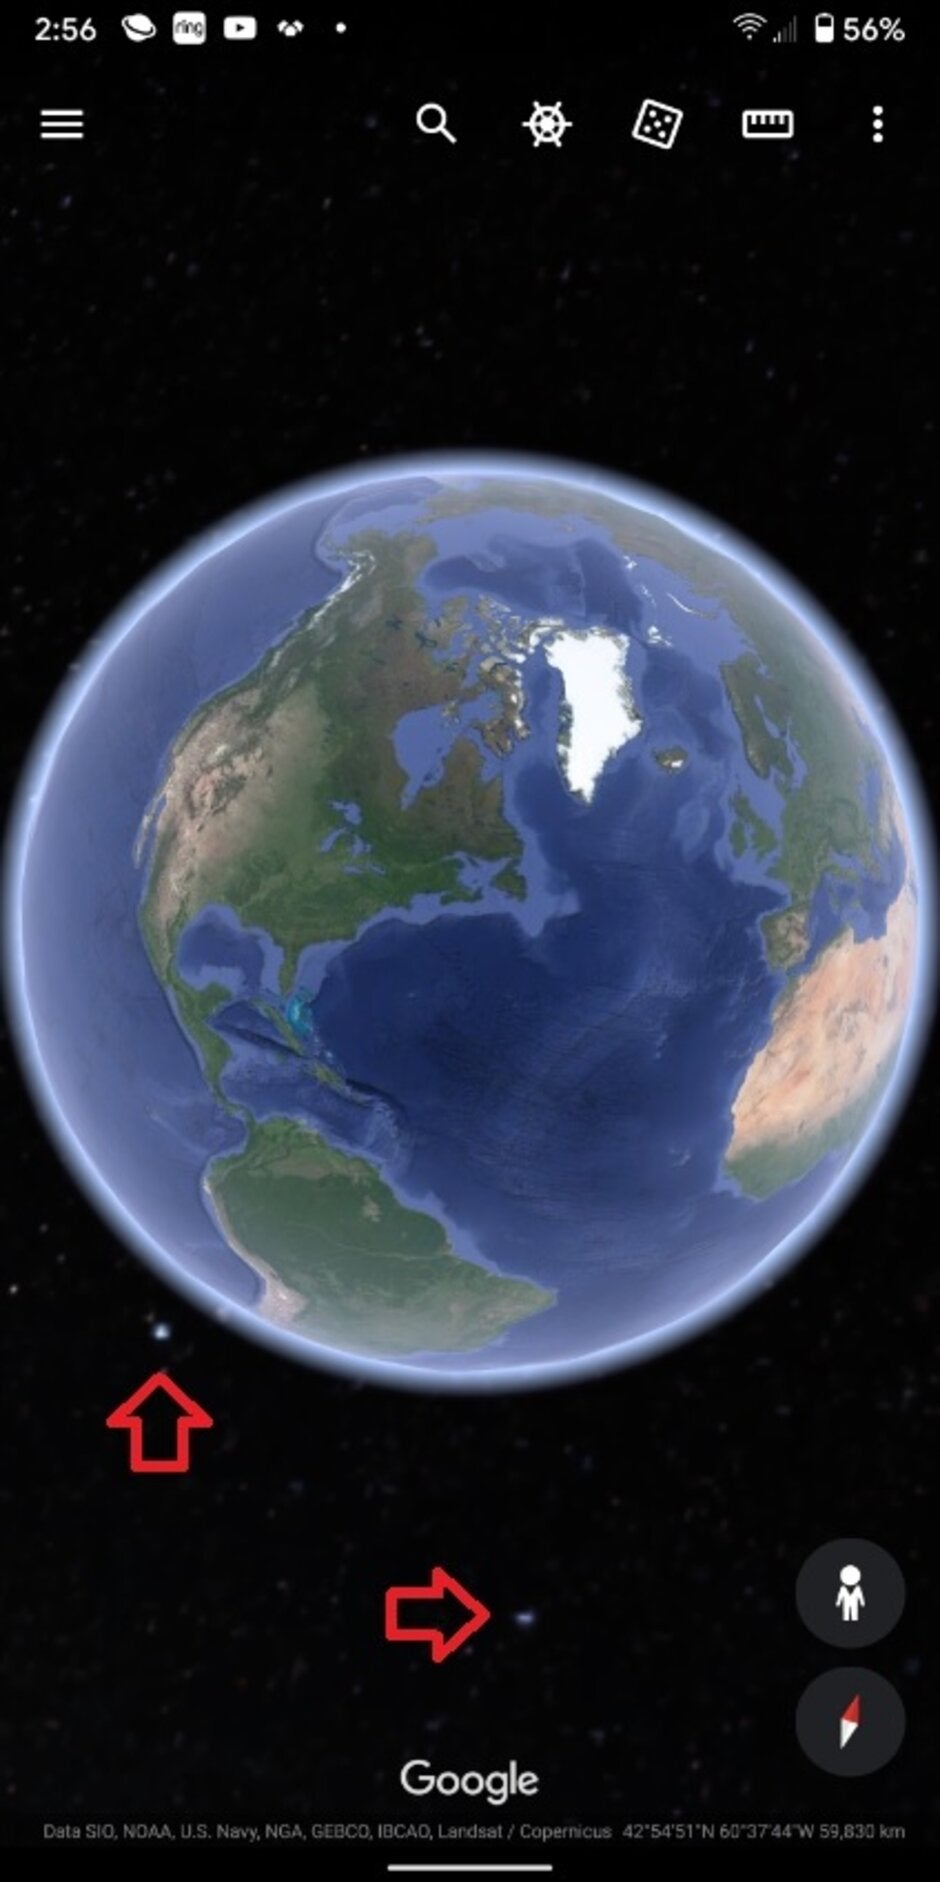 Arrows point out stars that now appear on the Google Earth app - Google reaches for the stars with update to mobile Earth app